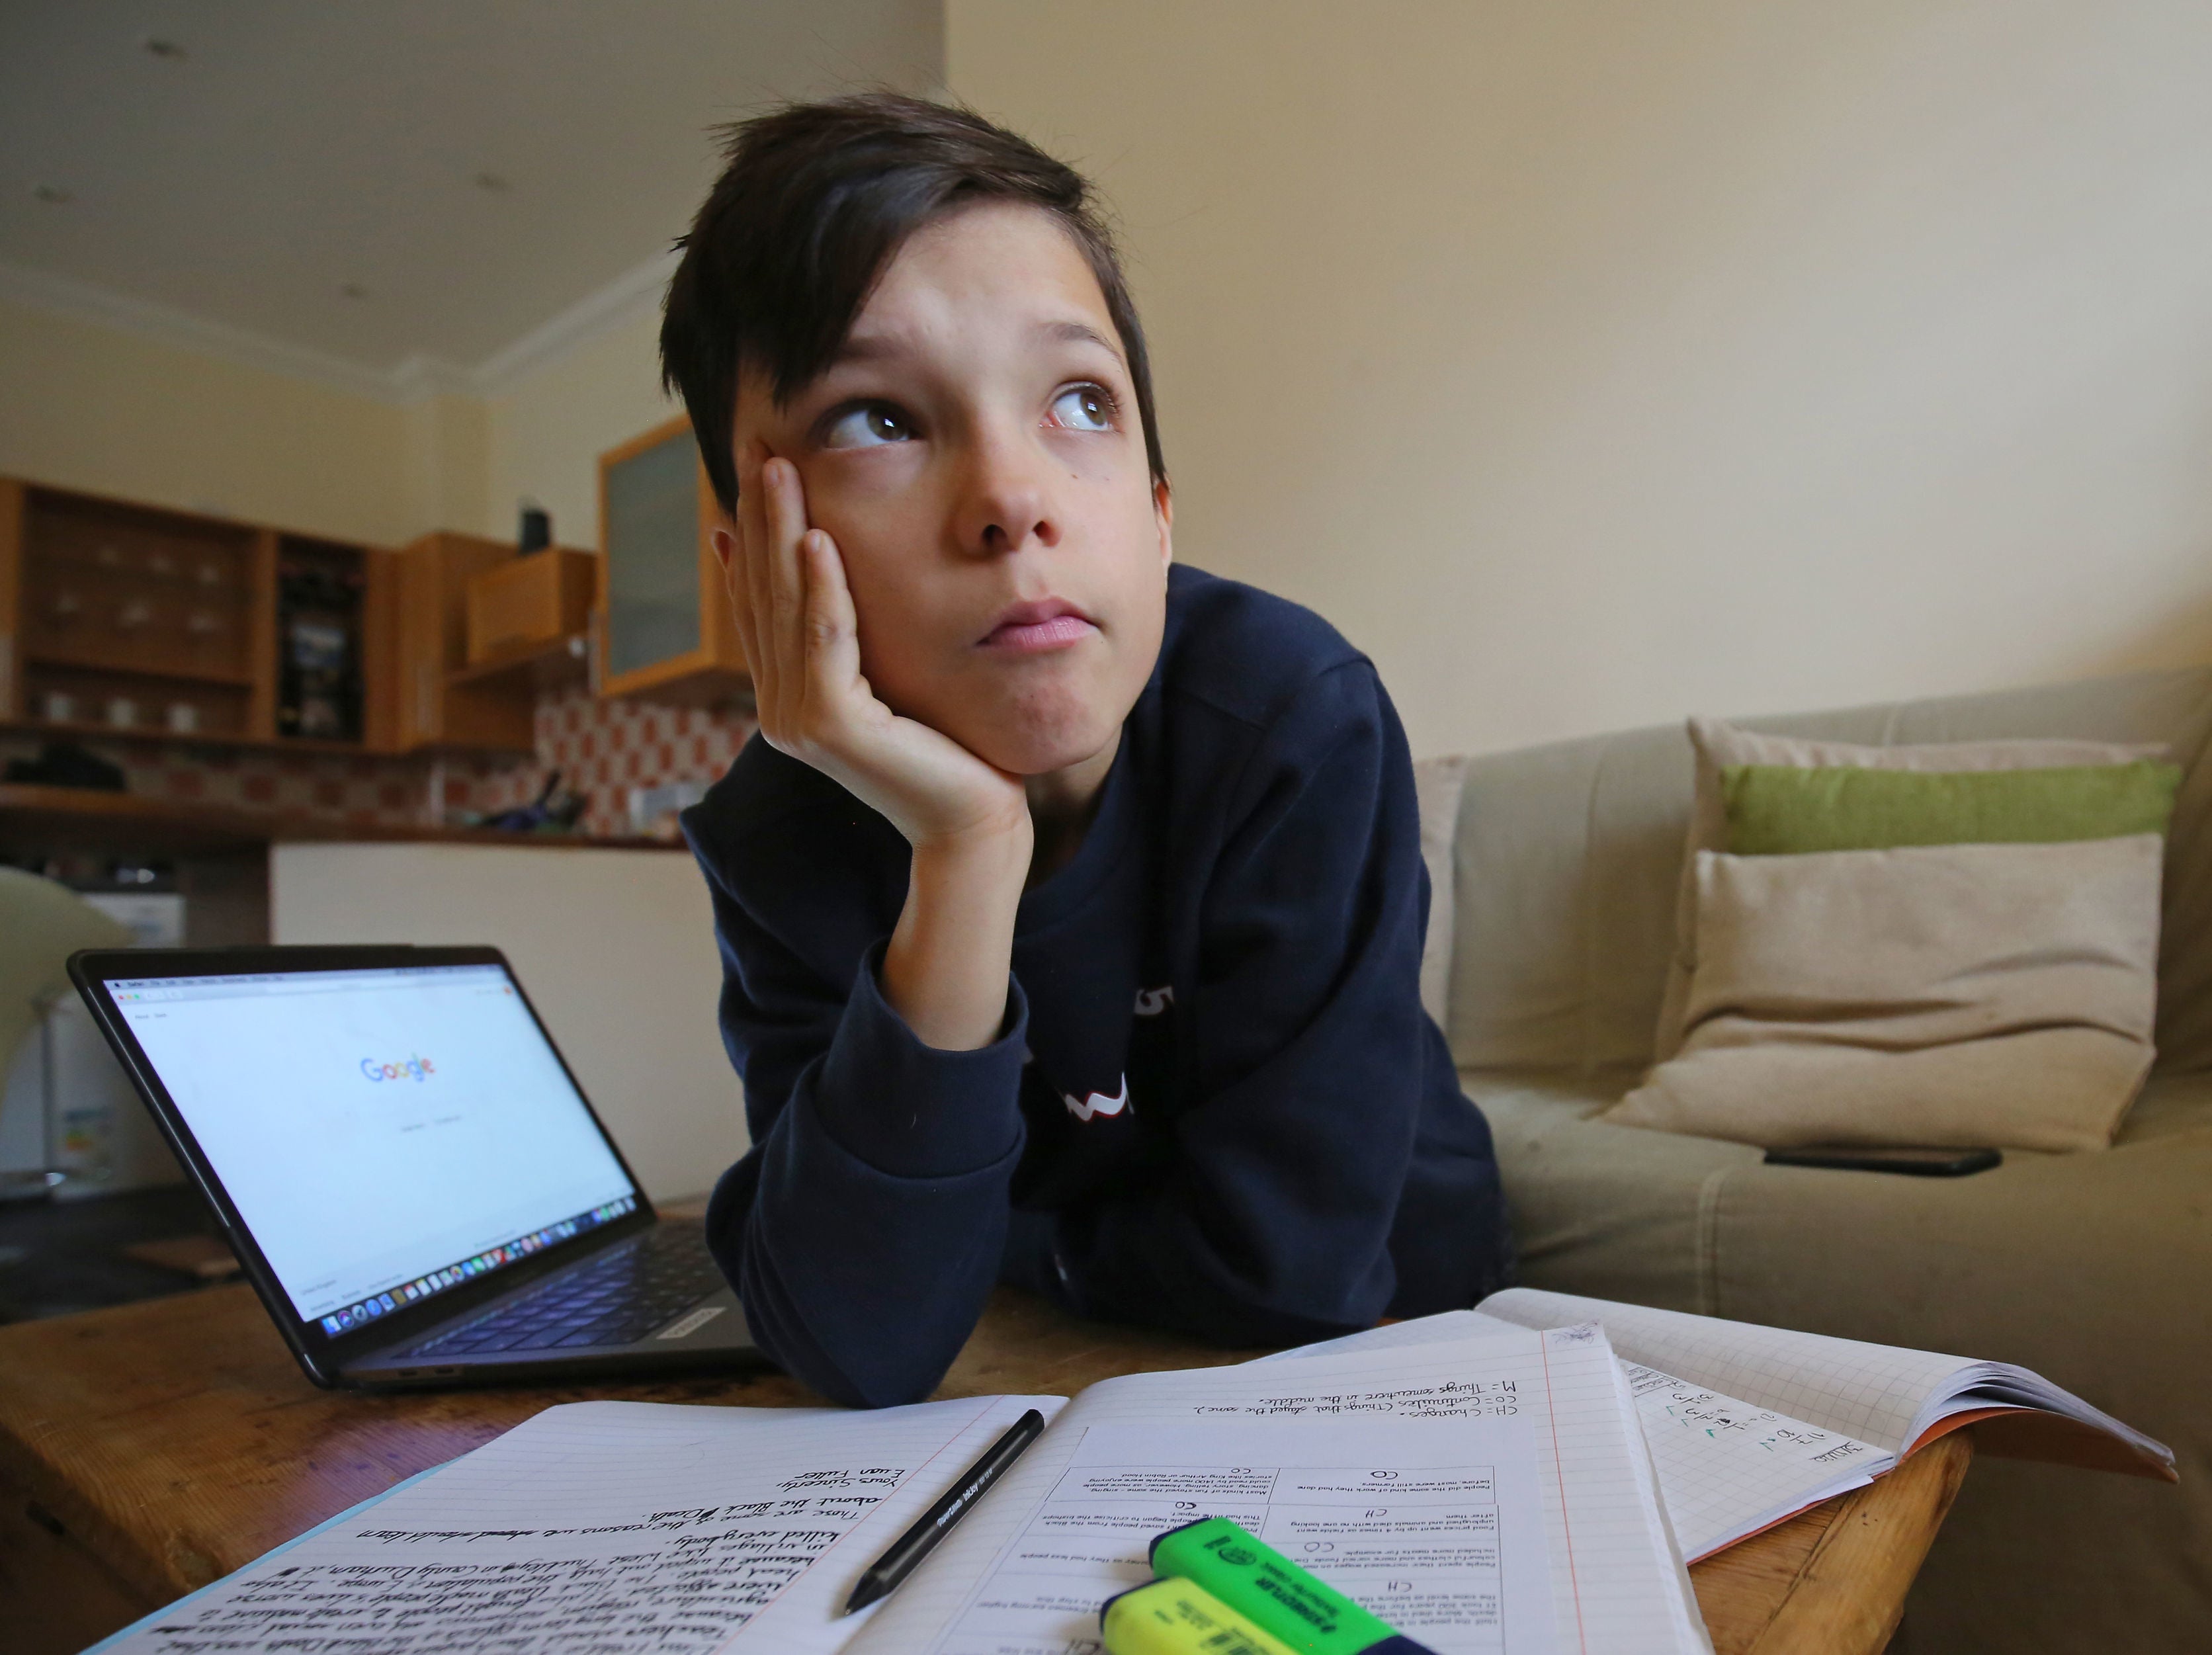 Secondary school pupil Euan Stanton studies at home during the lockdown